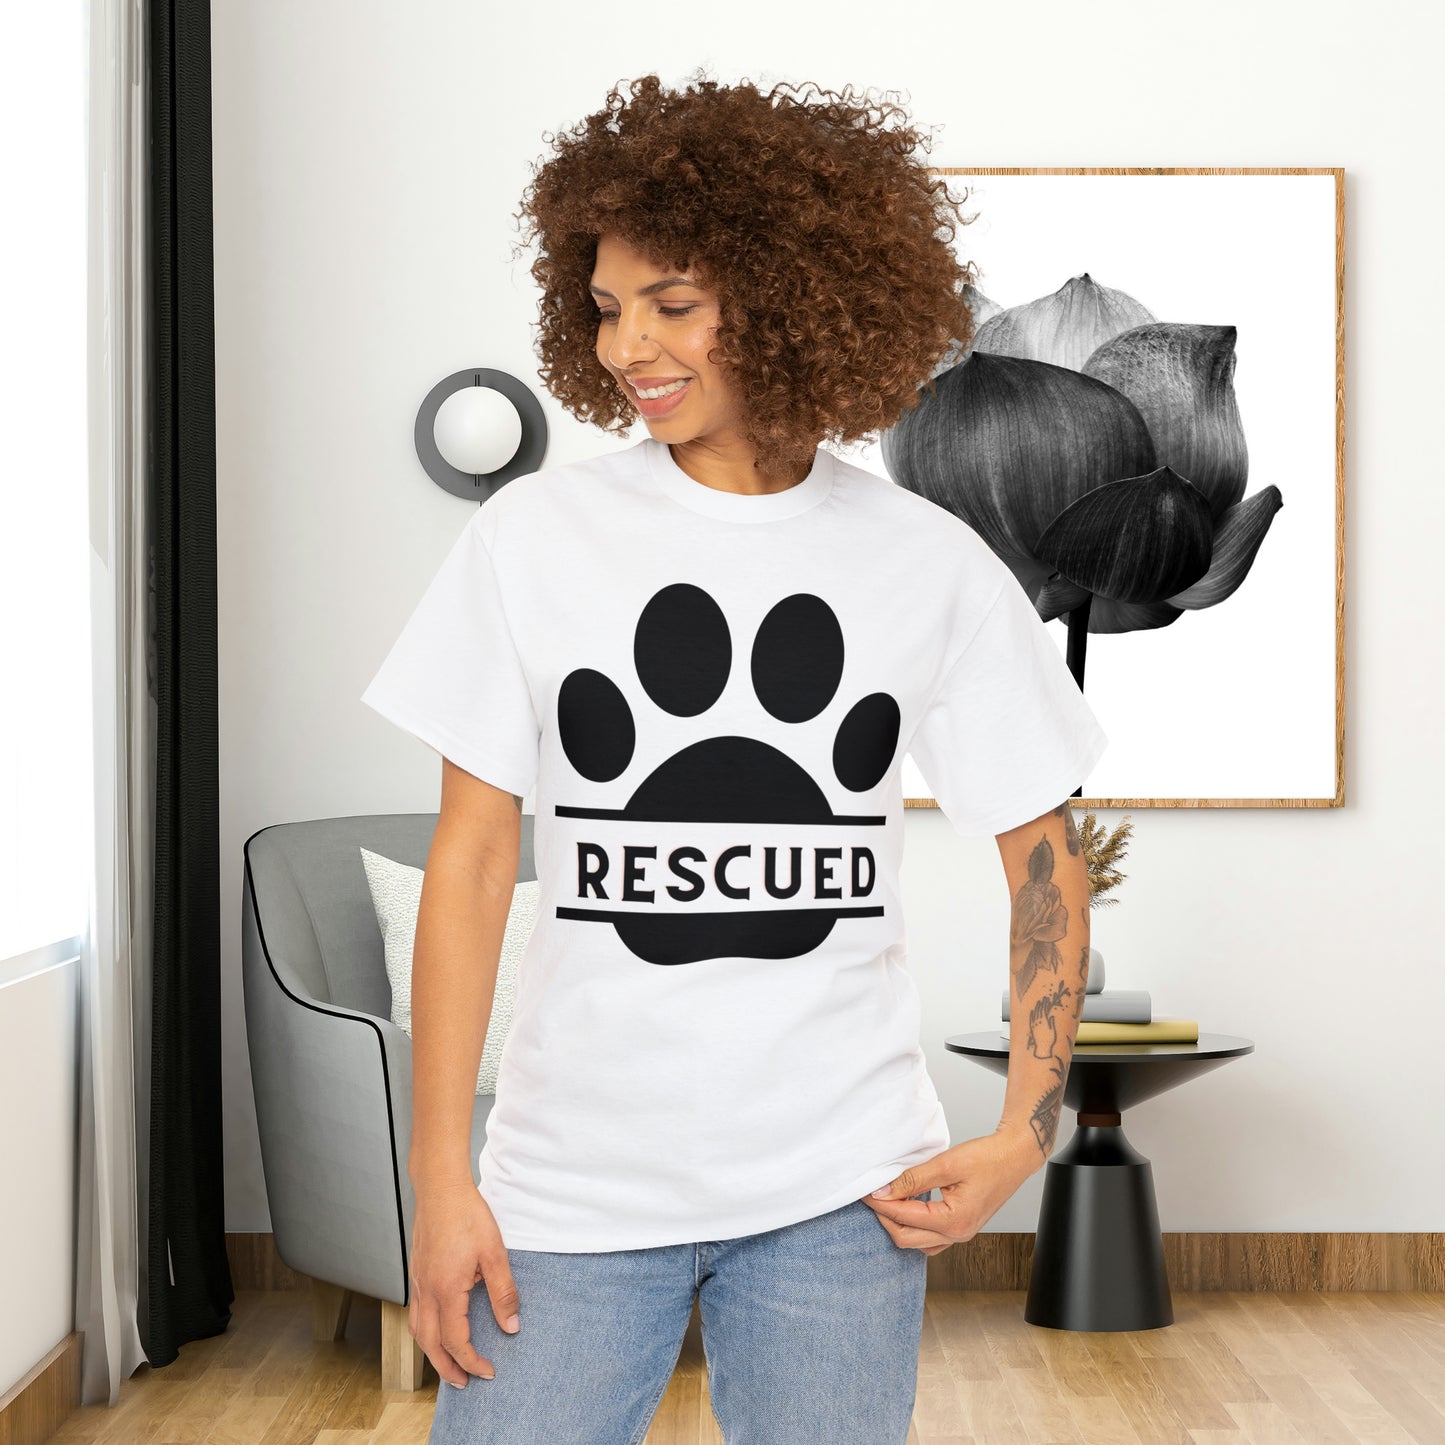 Rescue a furry friend and you will know unconditional love. This Unisex Heavy Cotton Tee is testament to what every dog or cat “rescuer” knows.